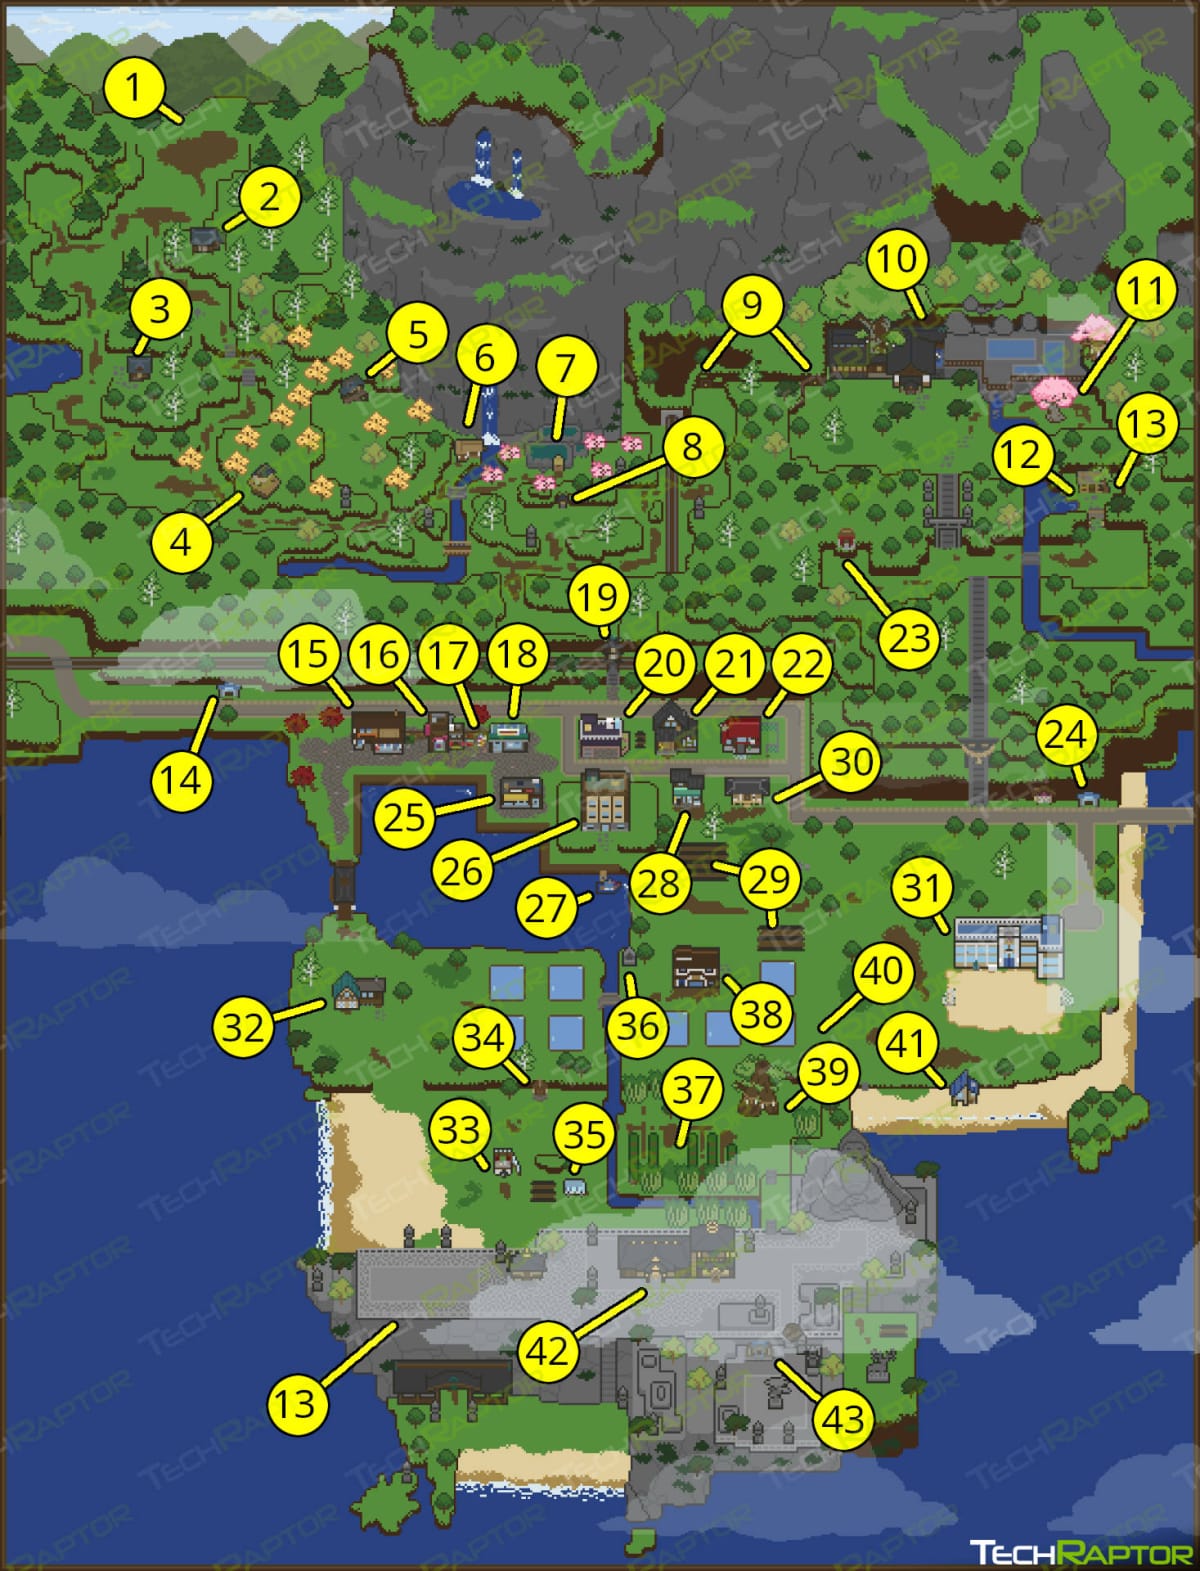 Spirittea Map and Locations Guide - Annotated Map Highlighting Important Locations in Town v3